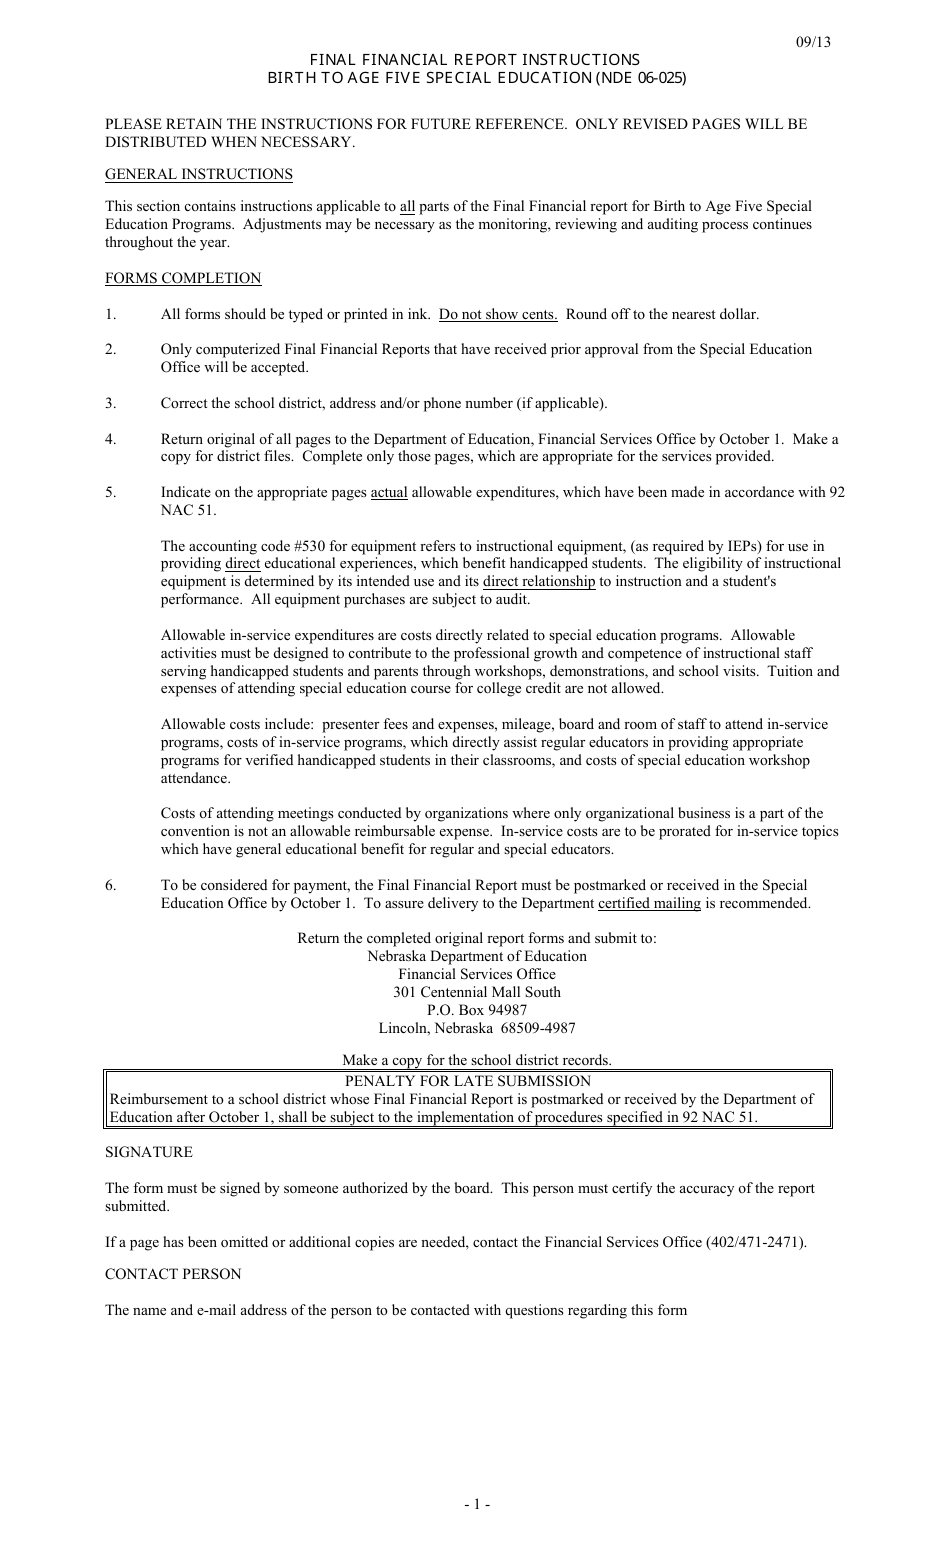 Instructions for NDE Form 06-025 Special Education Final Financial Report for Children With Disabilities Birth to Age Five - Nebraska, Page 1